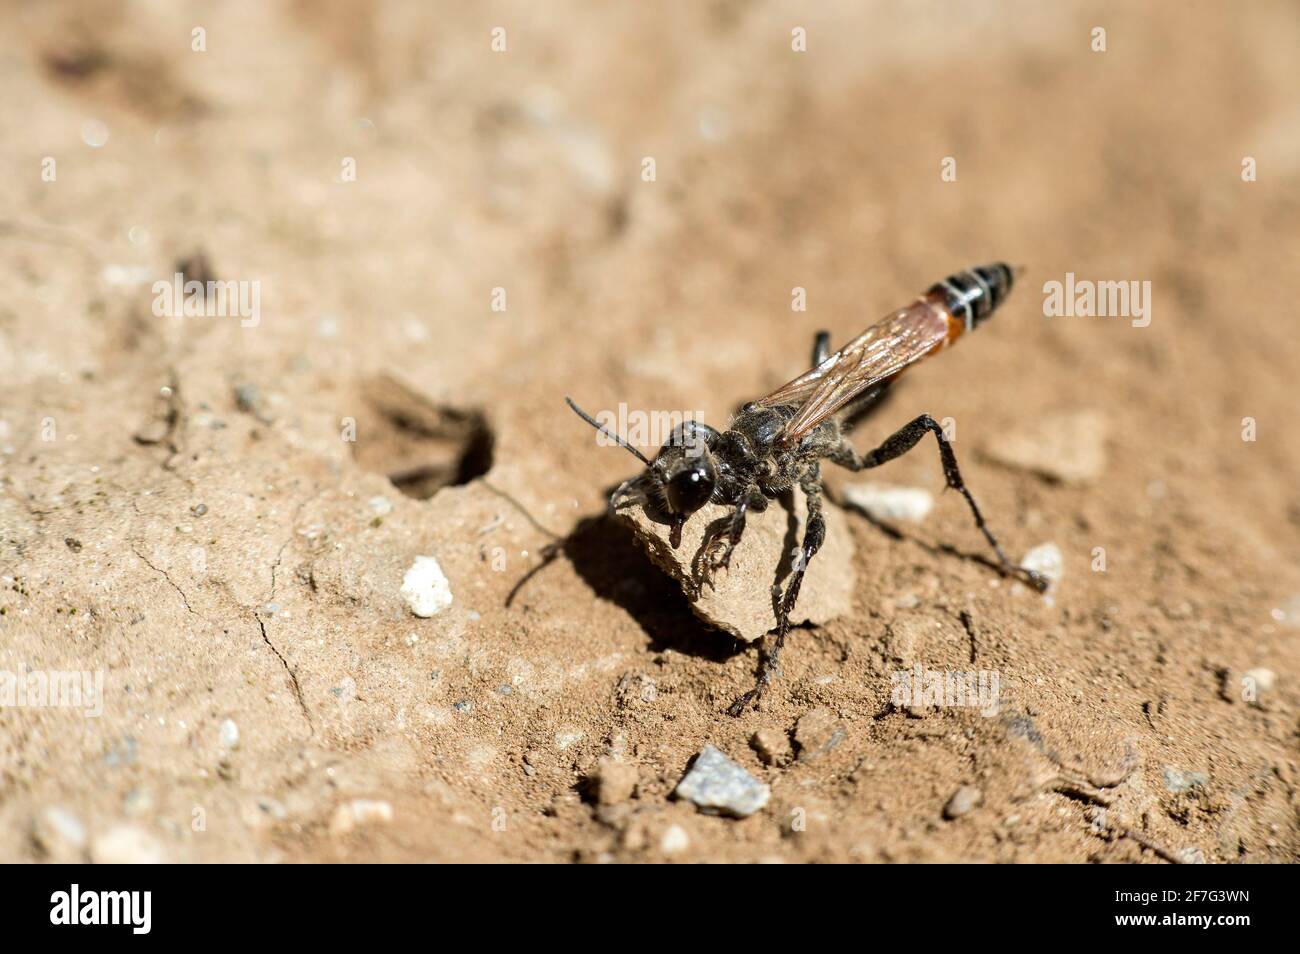 Female of Prionyx kirbii, a thread-waisted wasp from the Sphecidae family, closing its nest burrow with a stone, Valais, Switzerland Stock Photo